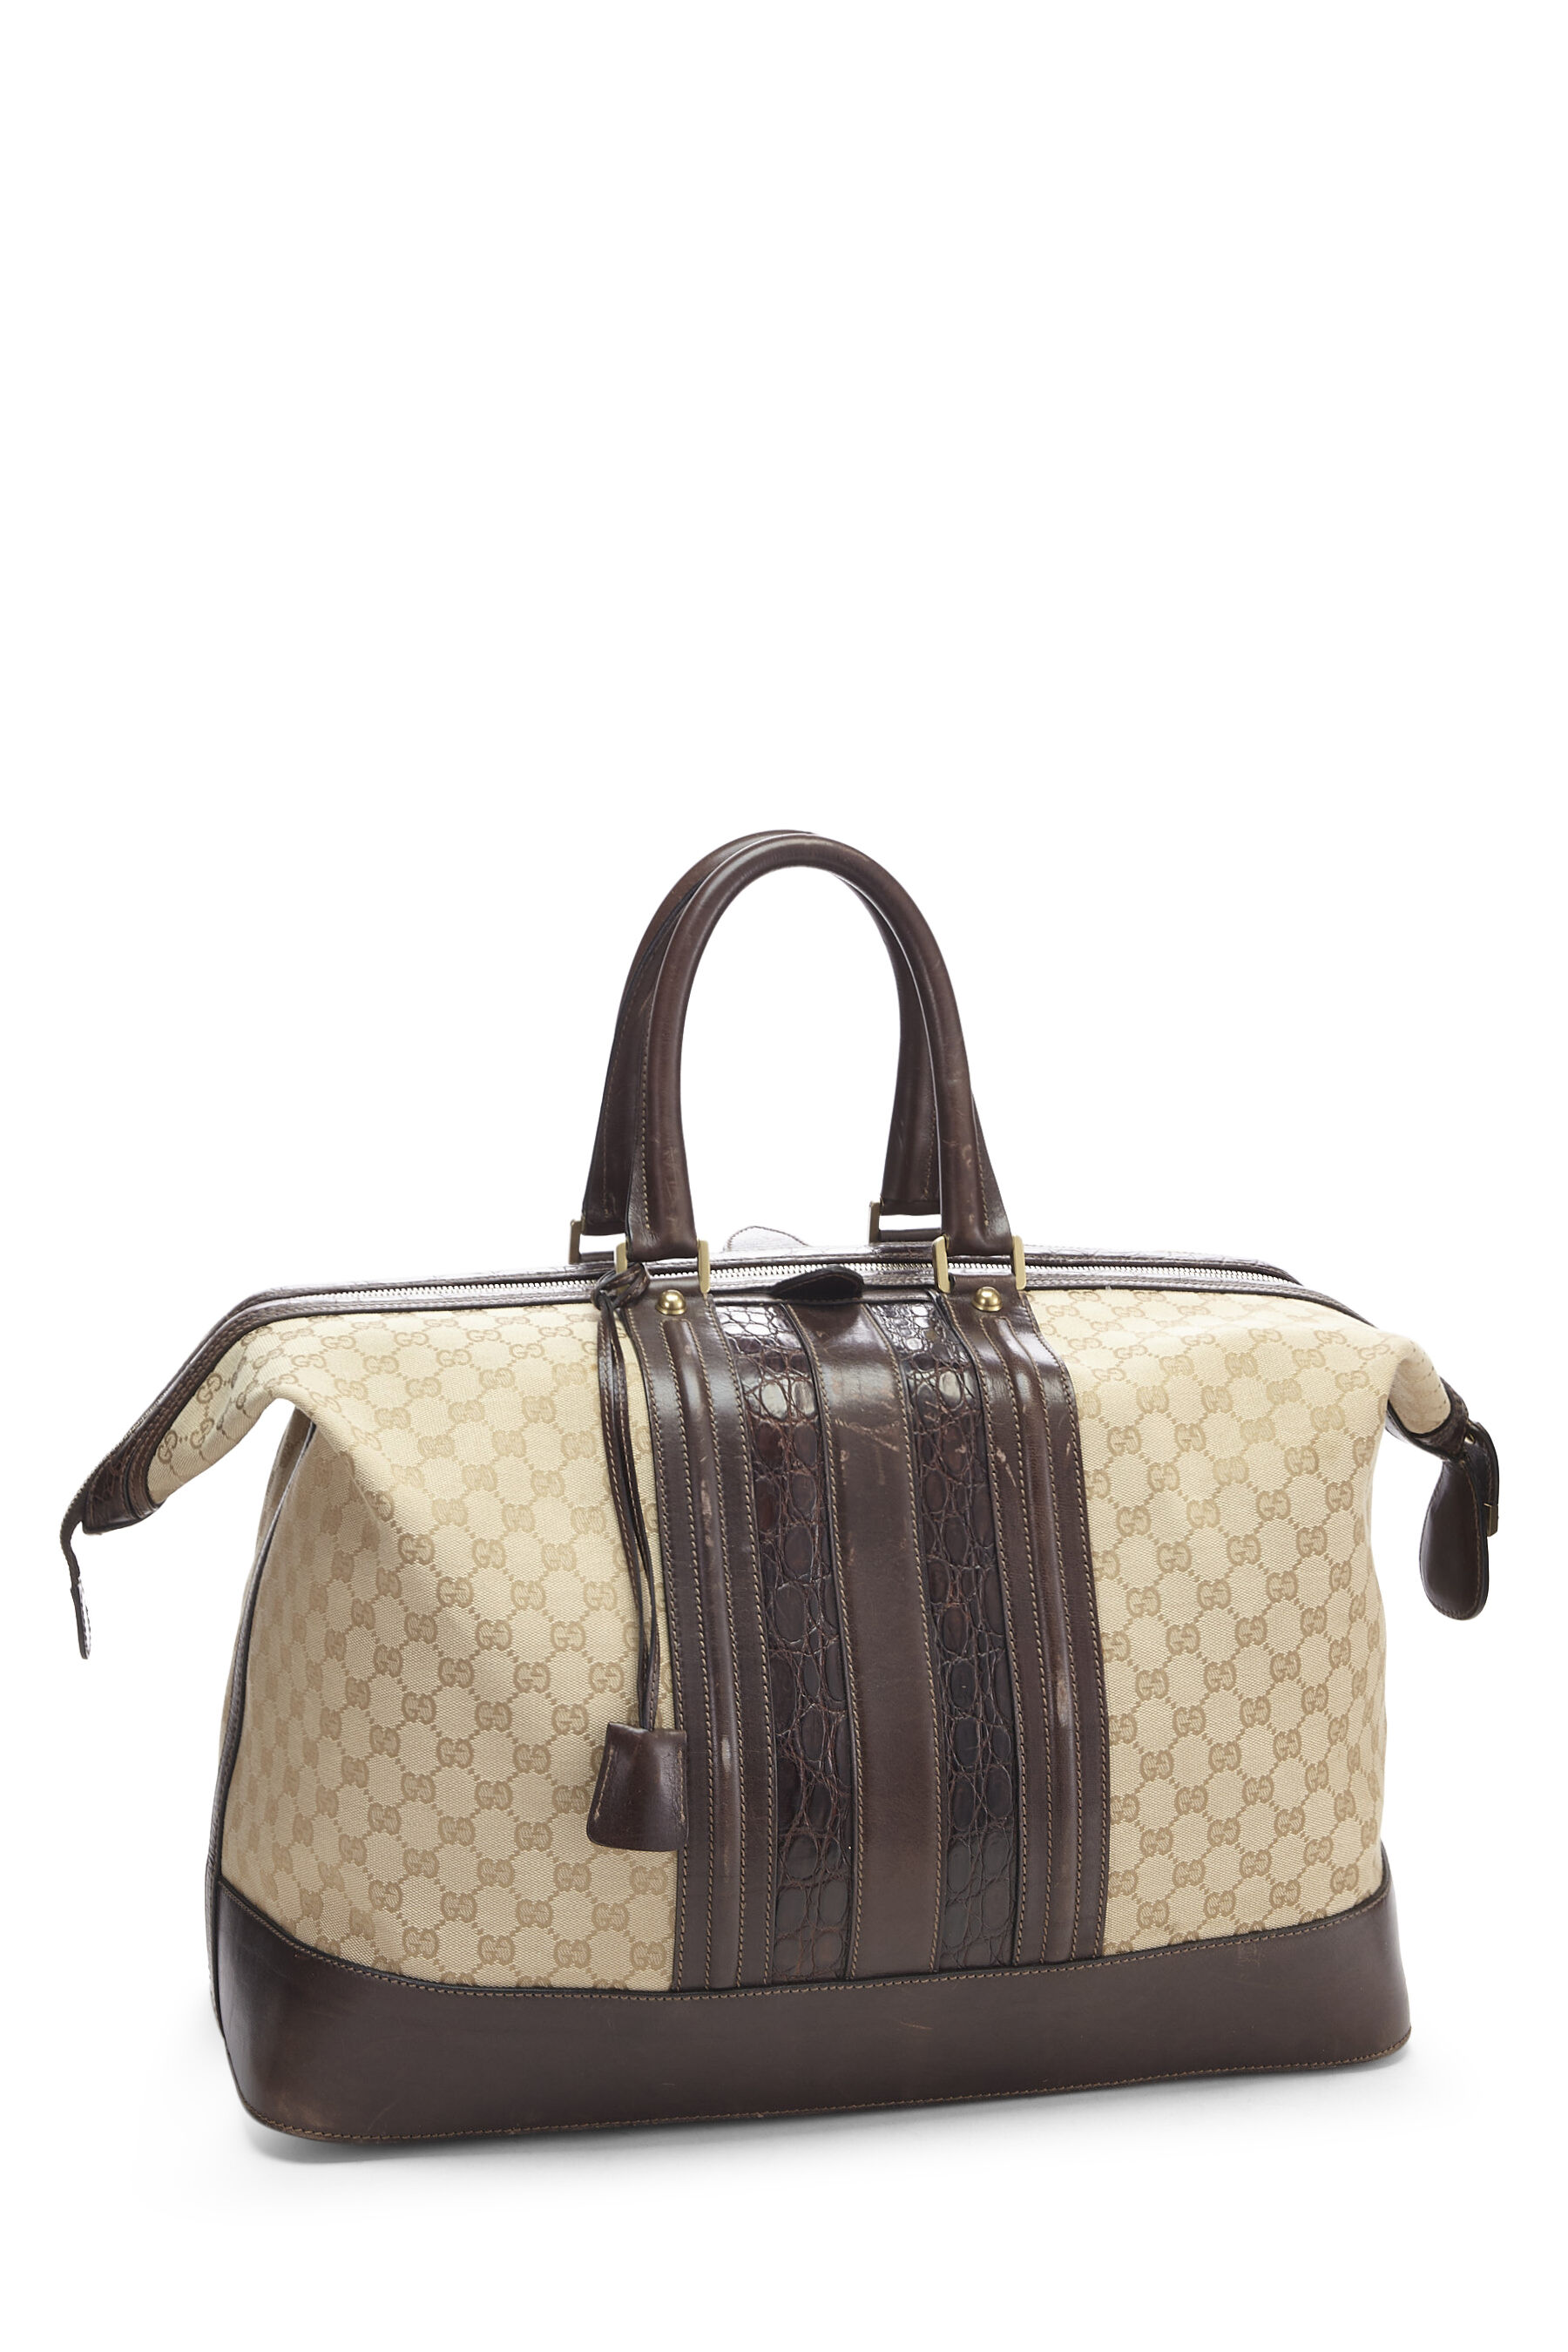 SALE Ultra Rare and Vintage LOUIS VUITTON Keepall Duffle -  Norway